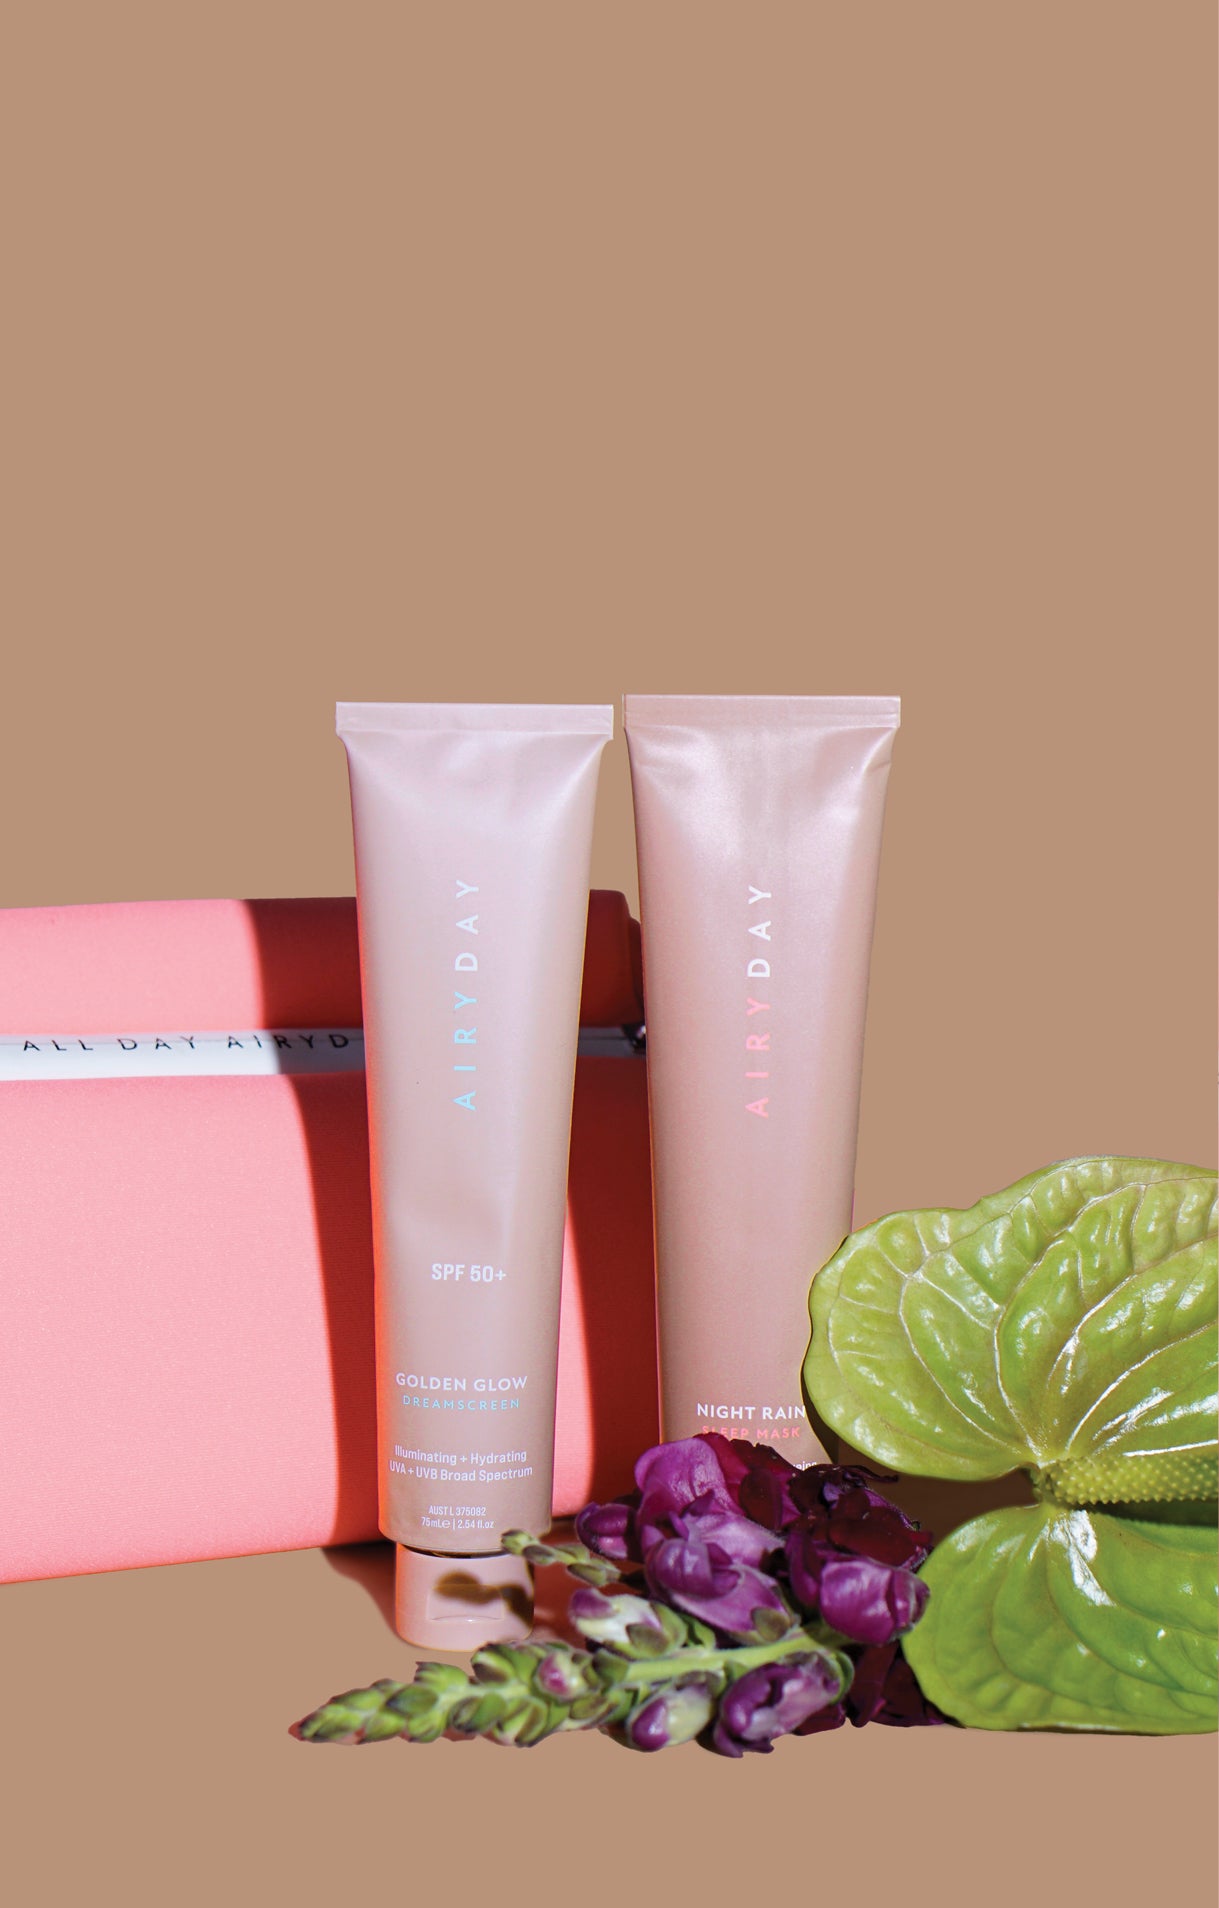 GLOW + NIGHT DUO SET "MOTHER'S DAY EDITION"